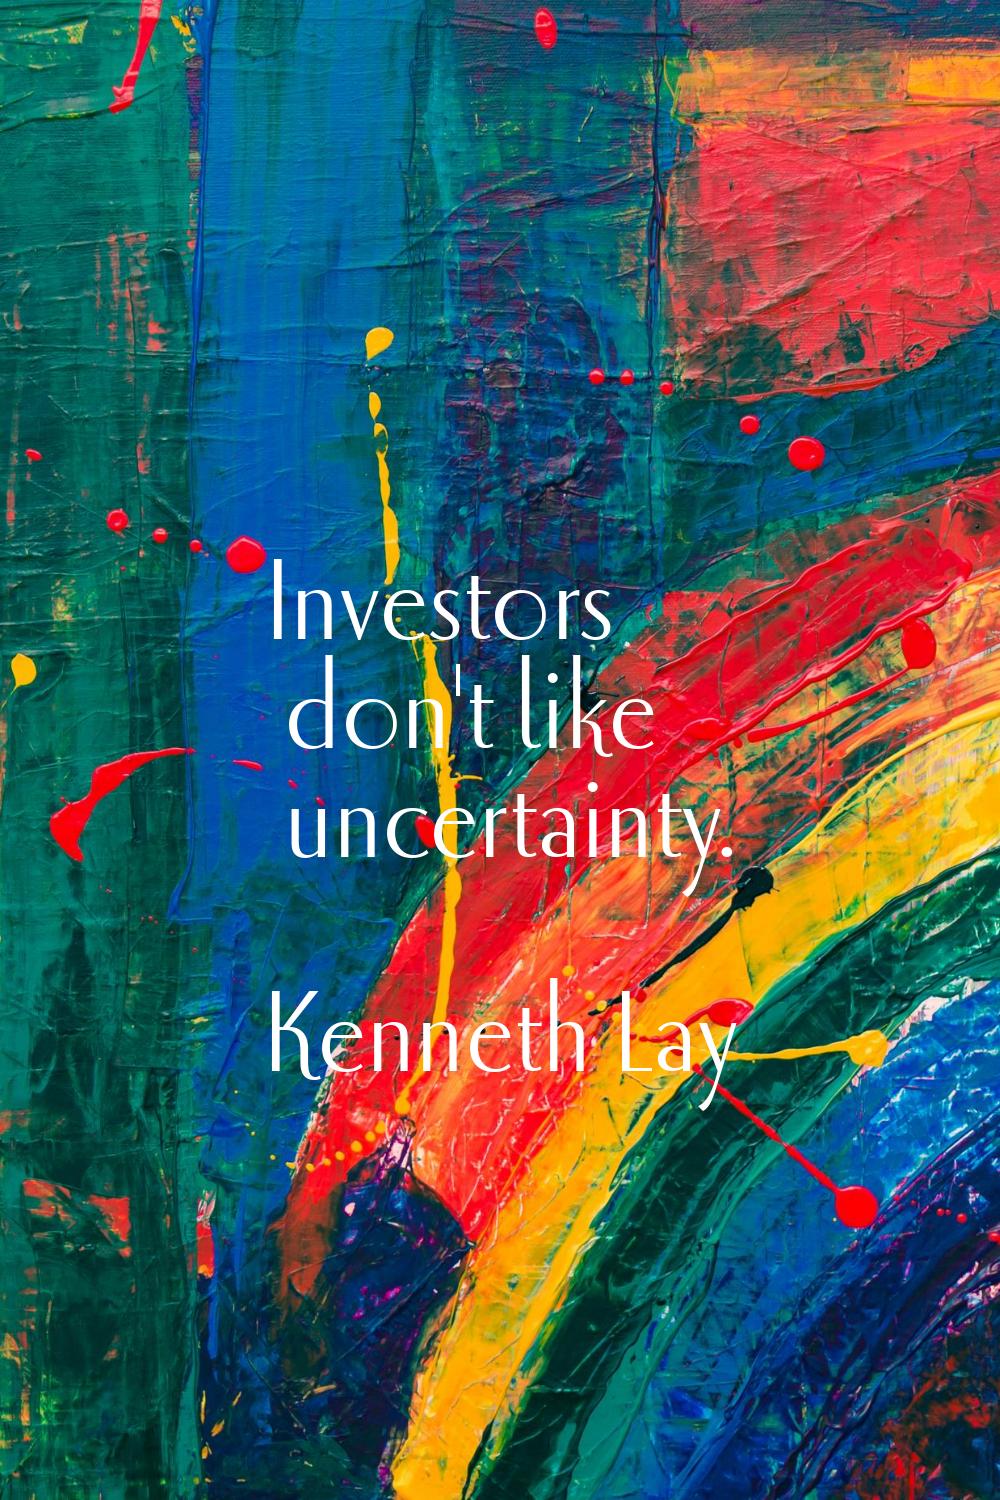 Investors don't like uncertainty.